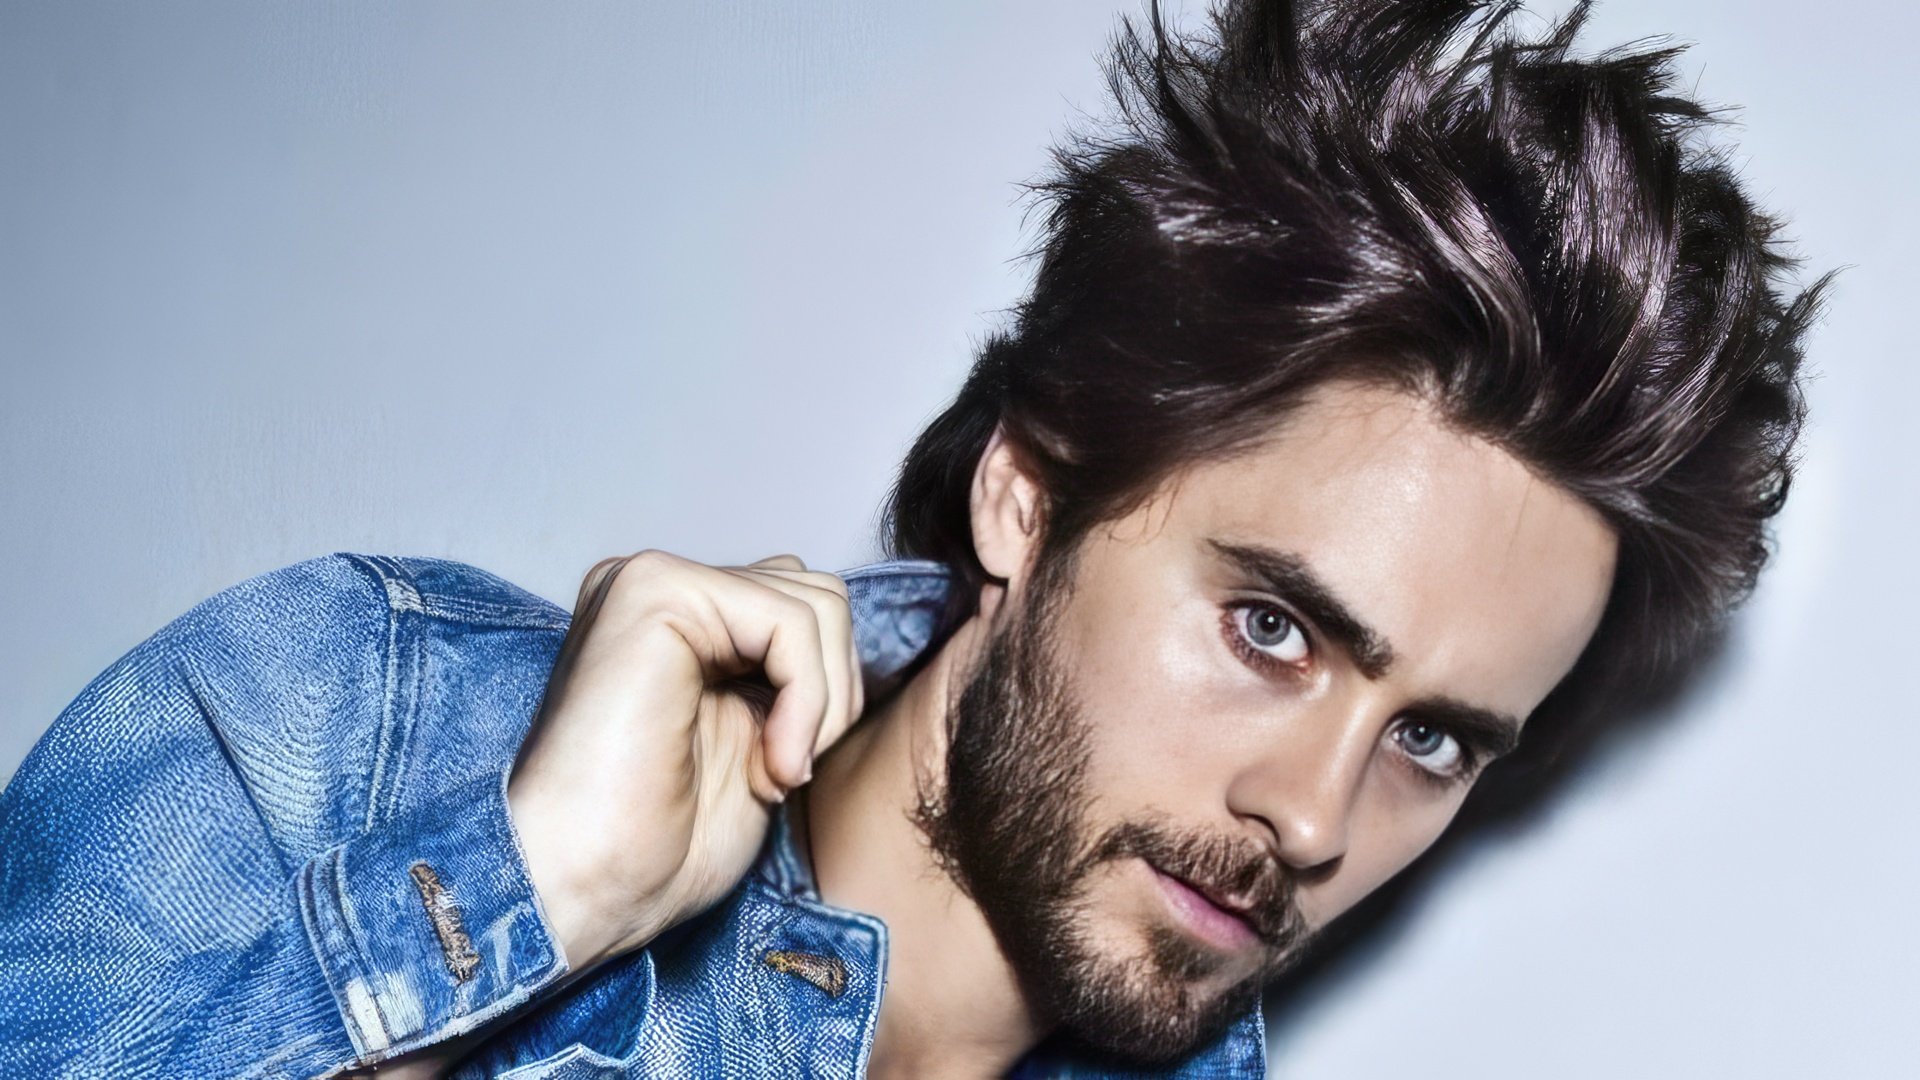 Actor, musician, and singer Jared Leto